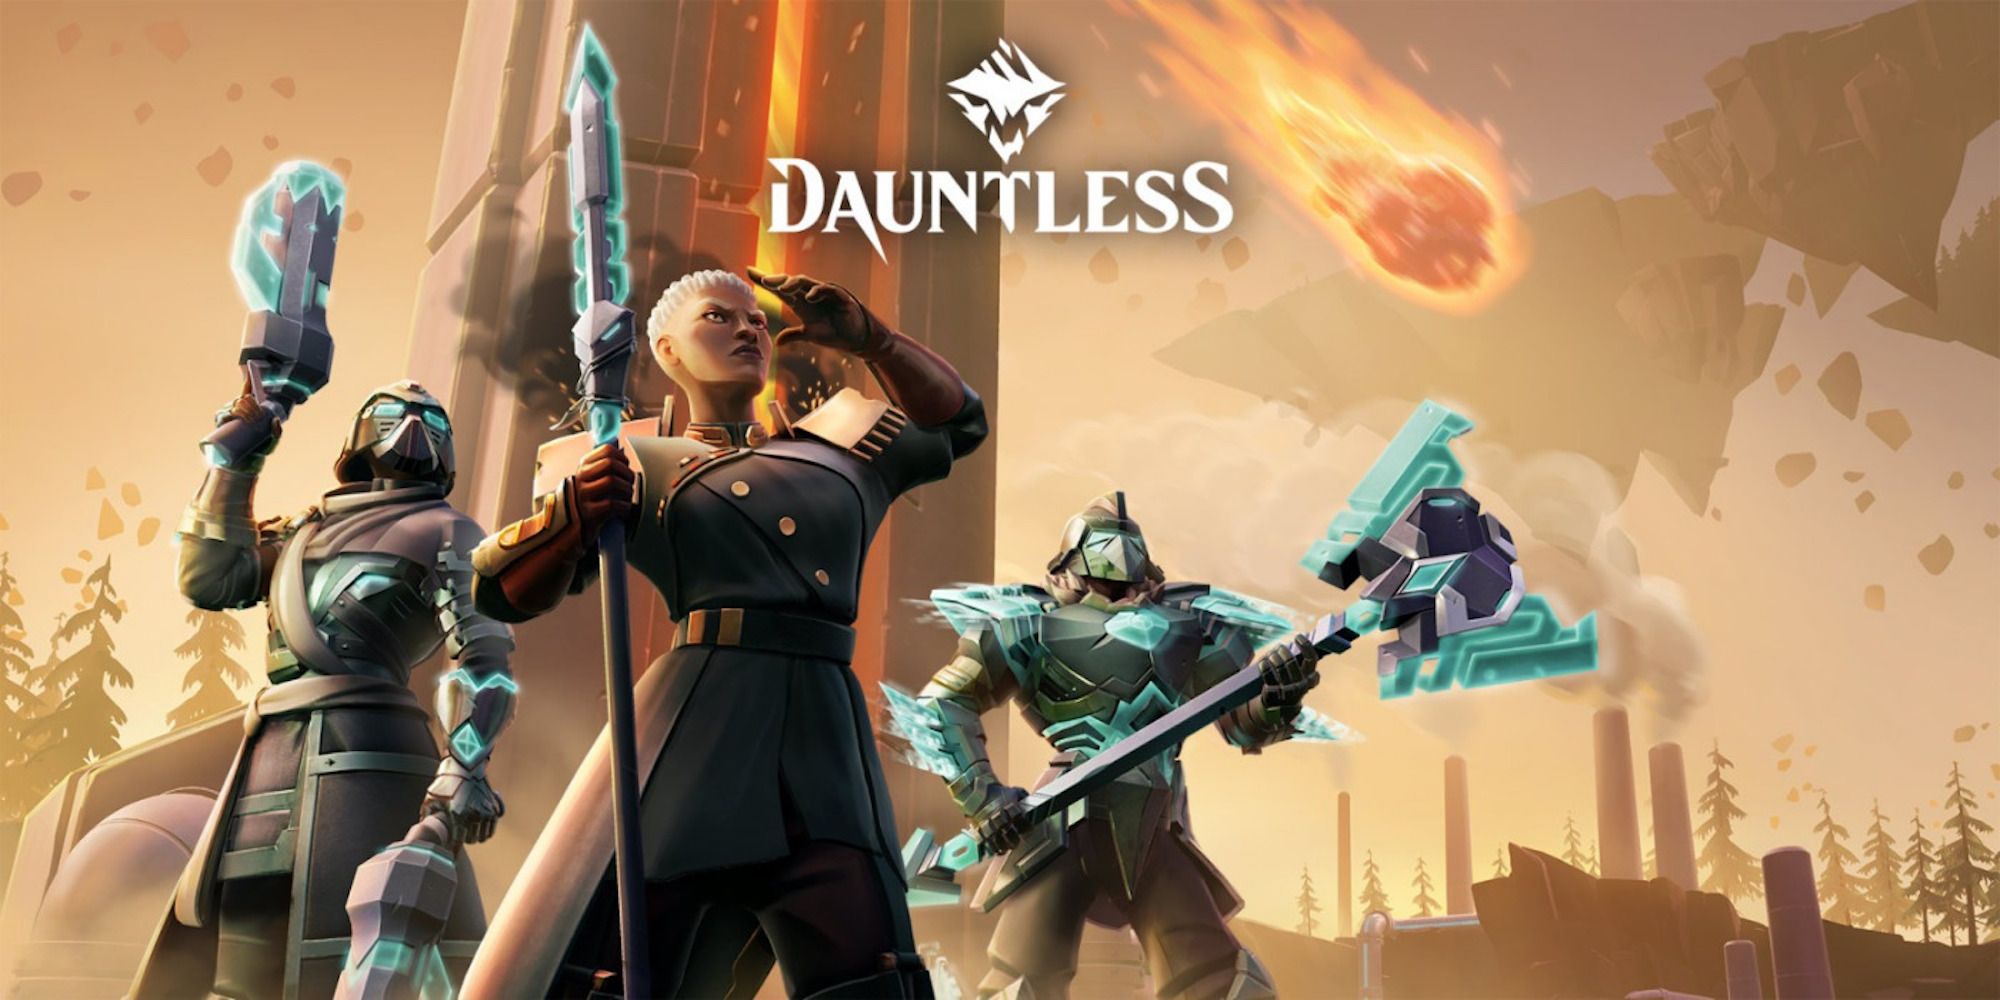 Promo art featuring characters from Dauntless